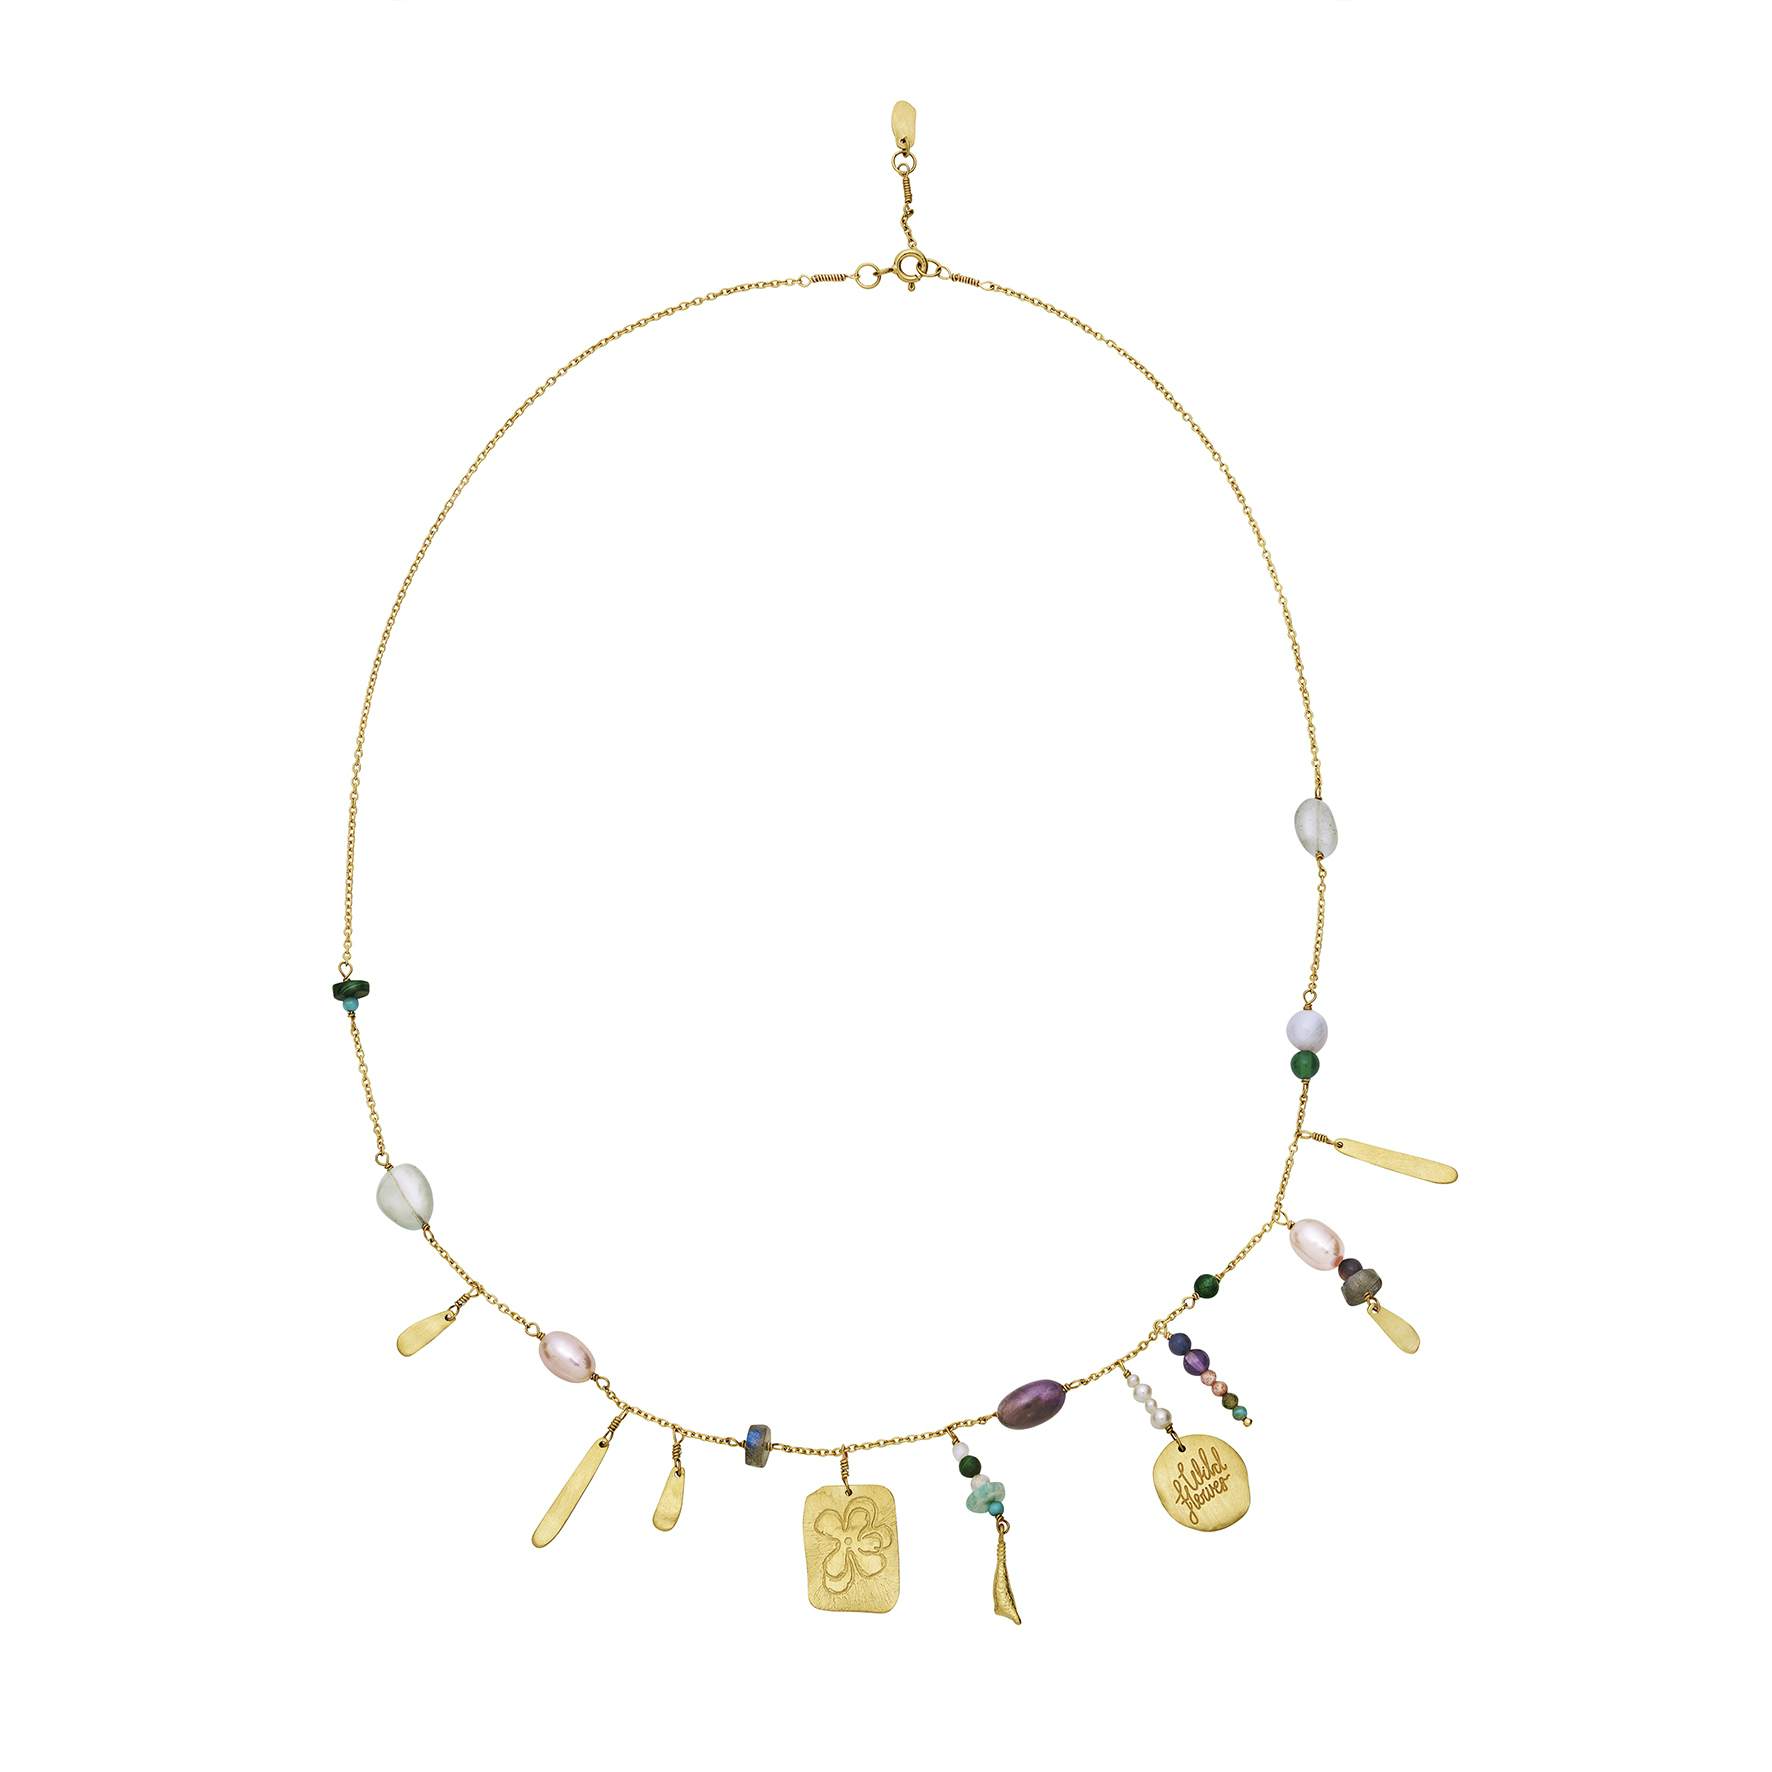 Celia Necklace from Maanesten in Goldplated-Silver Sterling 925